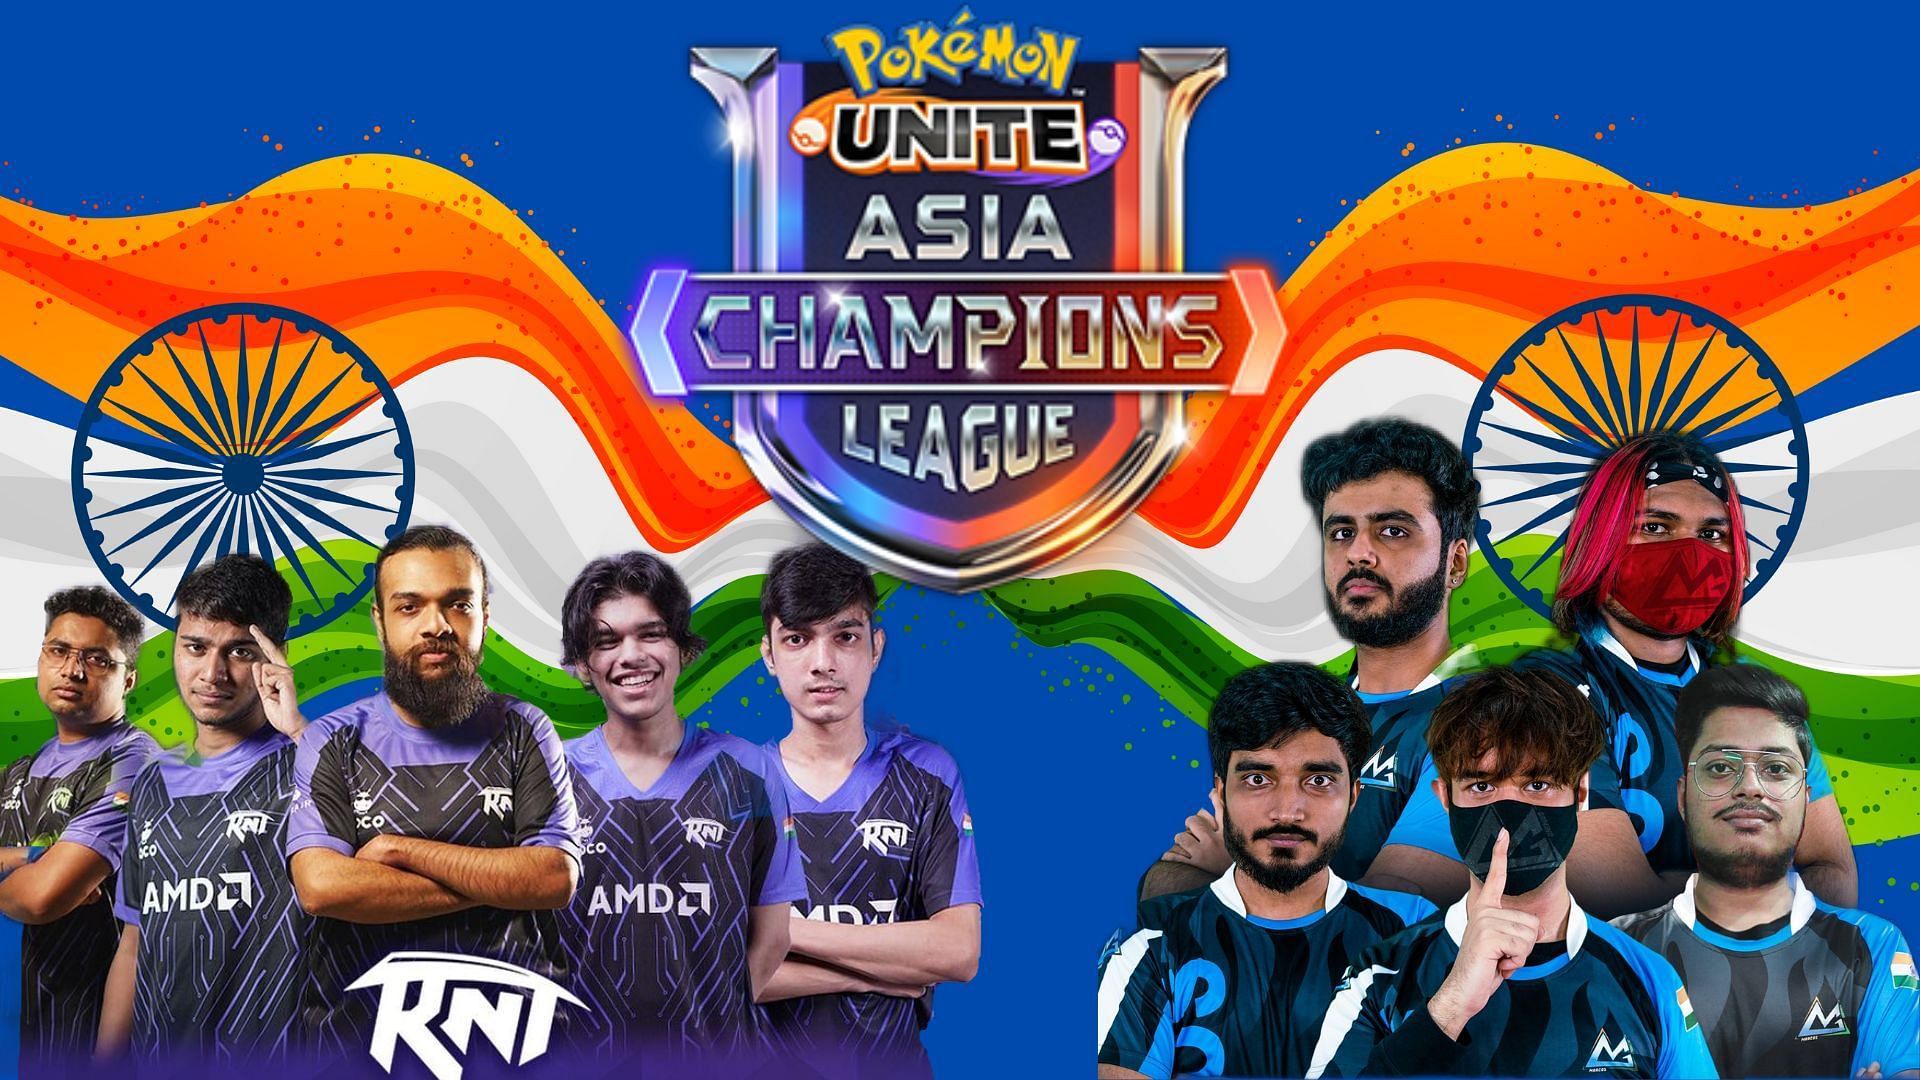 Revenant and Marcos Gaming qualified for Pokemon UNITE Asia Champions League 2023 (Image via Sportskeeda)